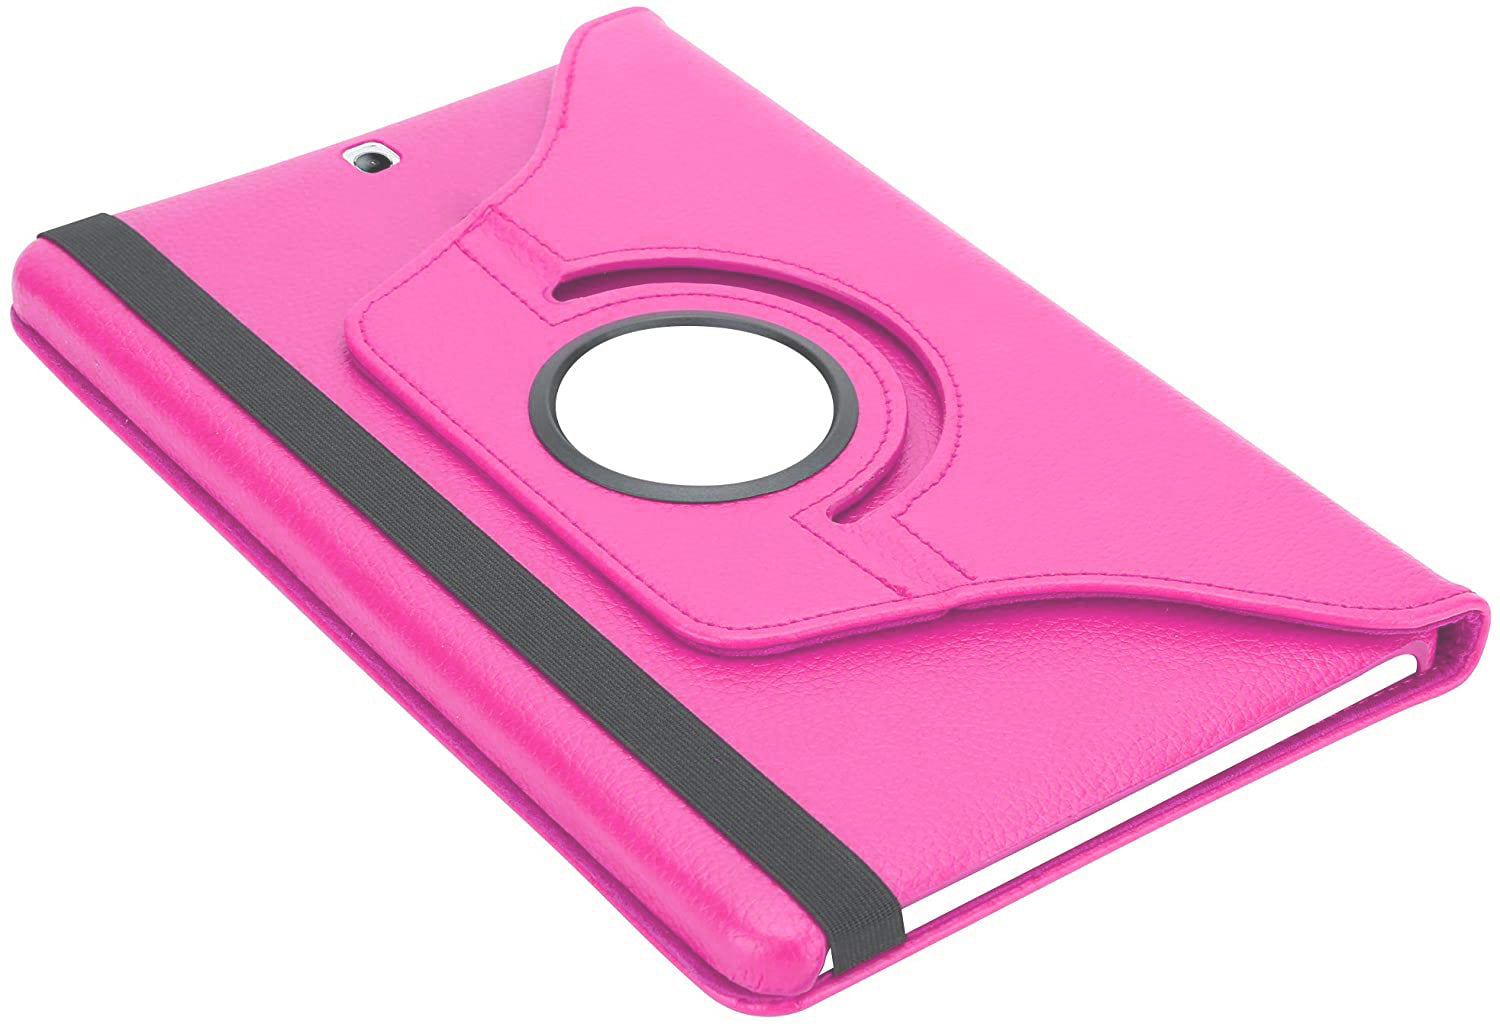 FREE - QBH Tablet Case compatible with Samsung Galaxy Tab S2 (9.7" Zoll) SM-T815N / T813N / T819N in PINK - e4cents